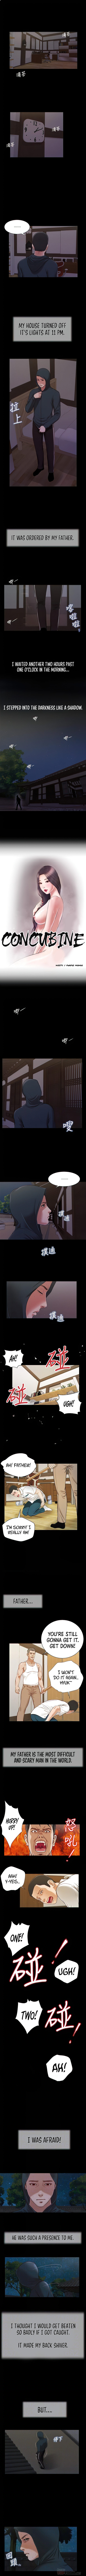 Concubine Chapter 9 - Page 2